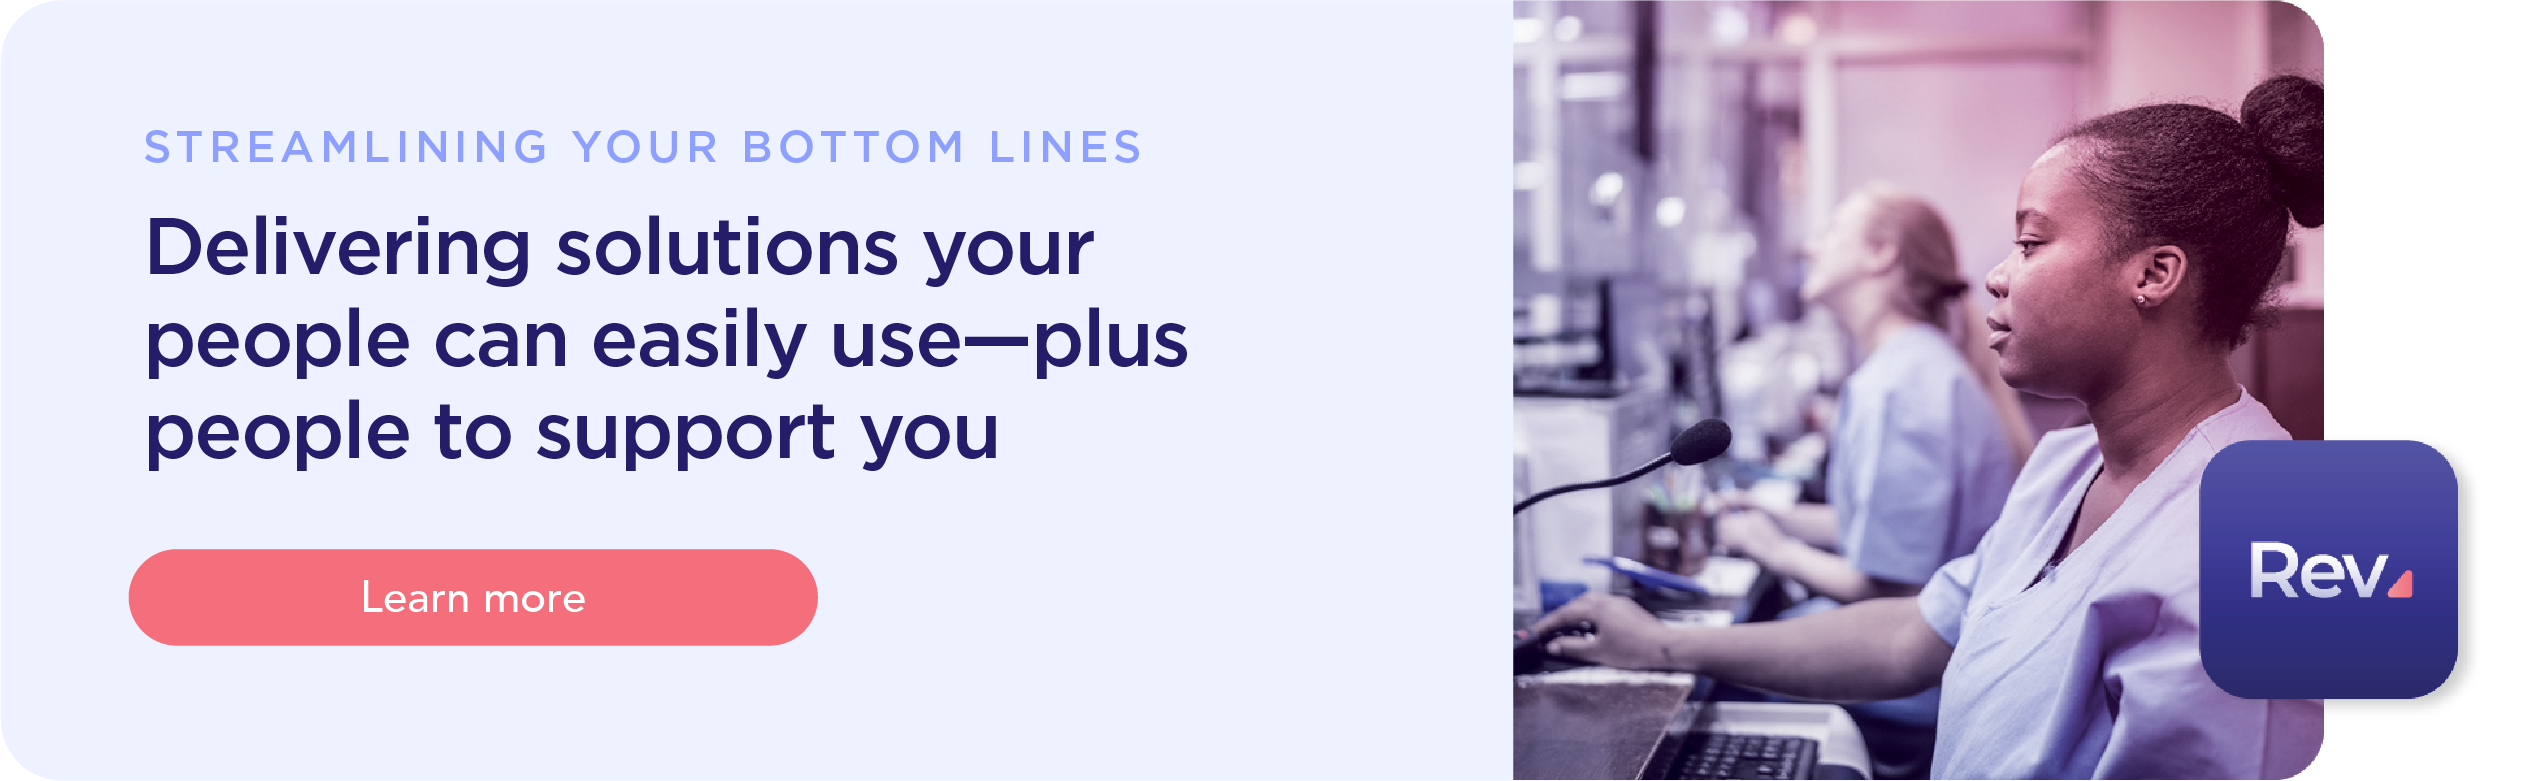 Delivering solutions your people can easily use - plus people to support you. Learn more at our streamlining your bottom line landing page.